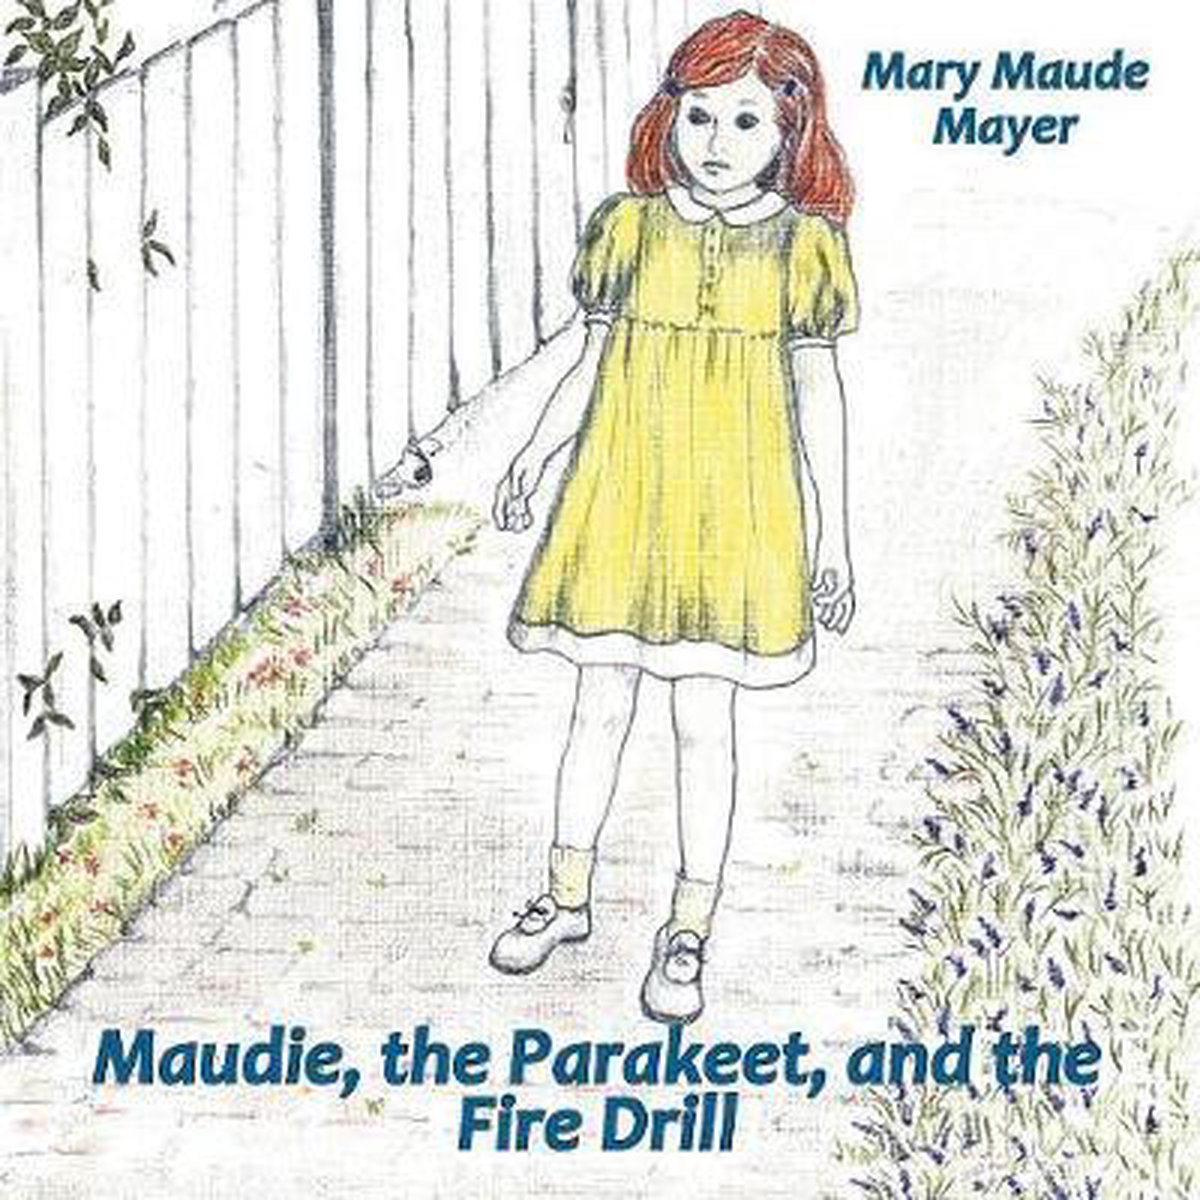 Maudie, the Parakeet, and the Fire Drill - Mary Maude Mayer